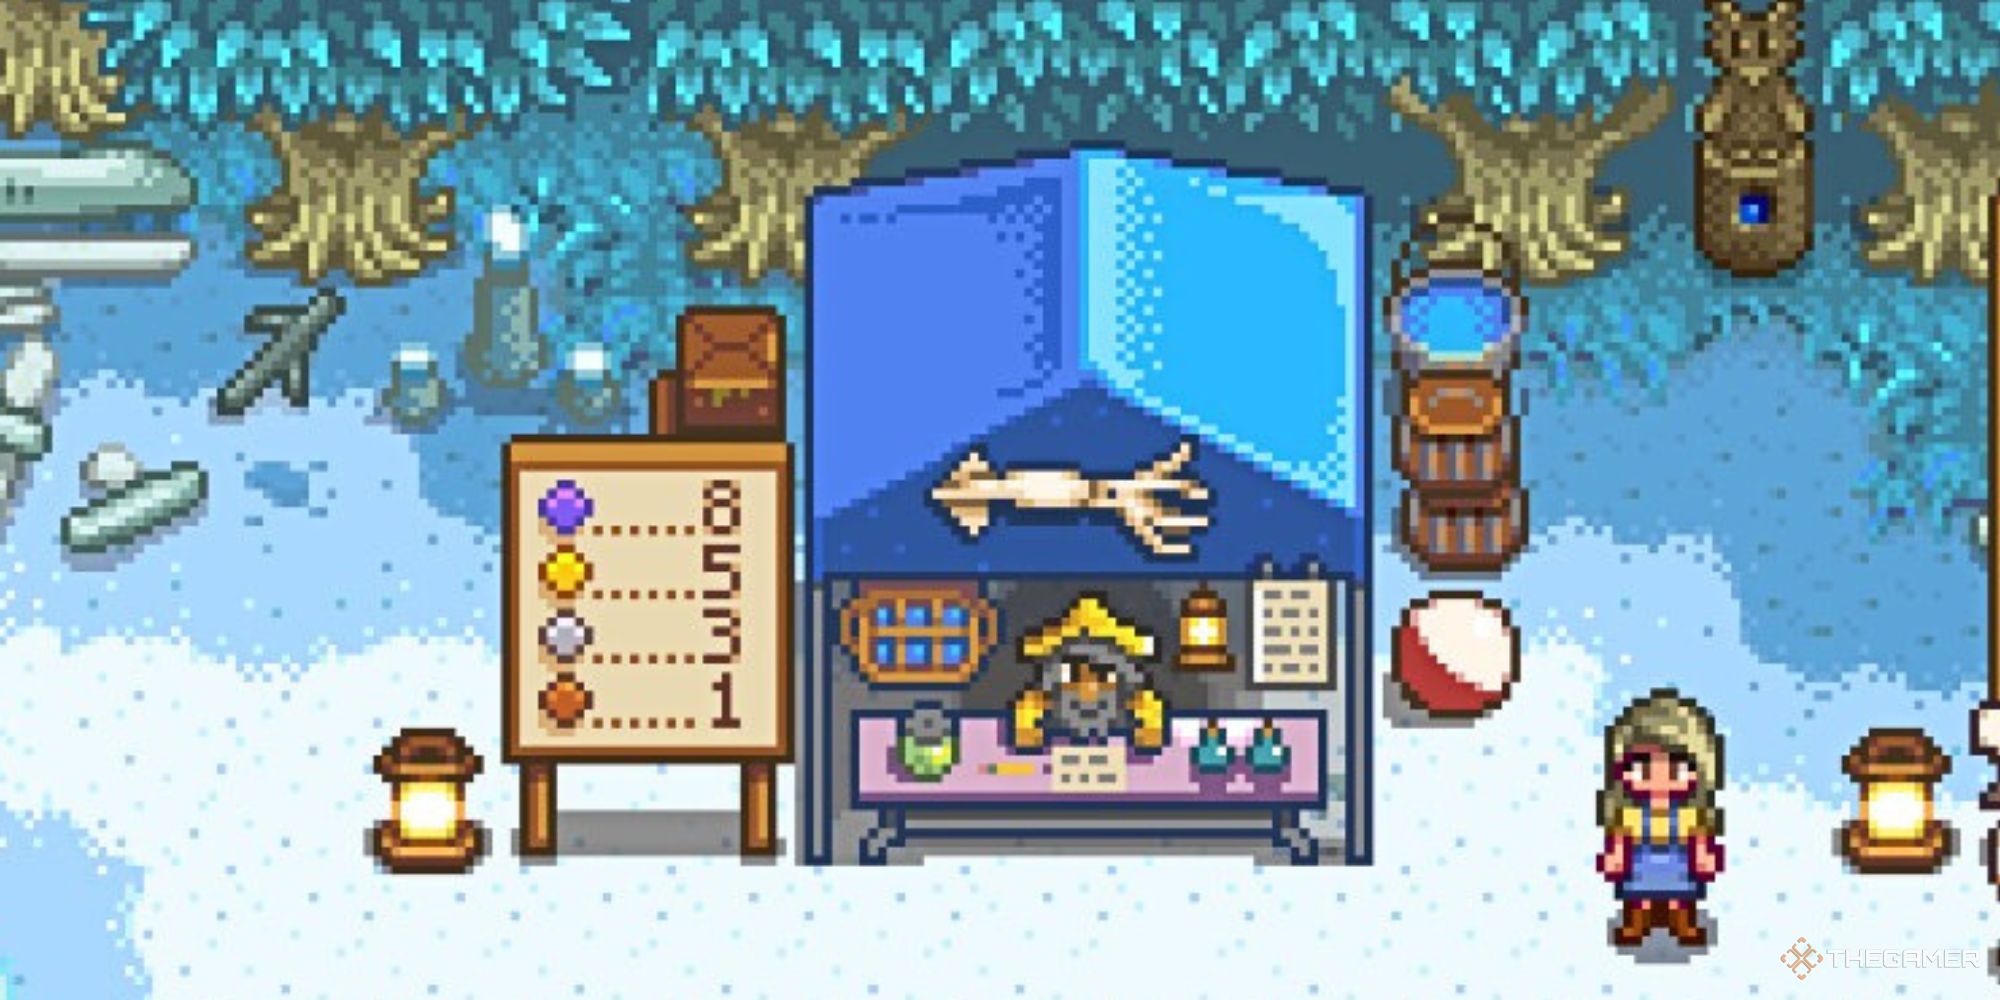 Squidfest booth with a player standing next to it in Stardew Valley